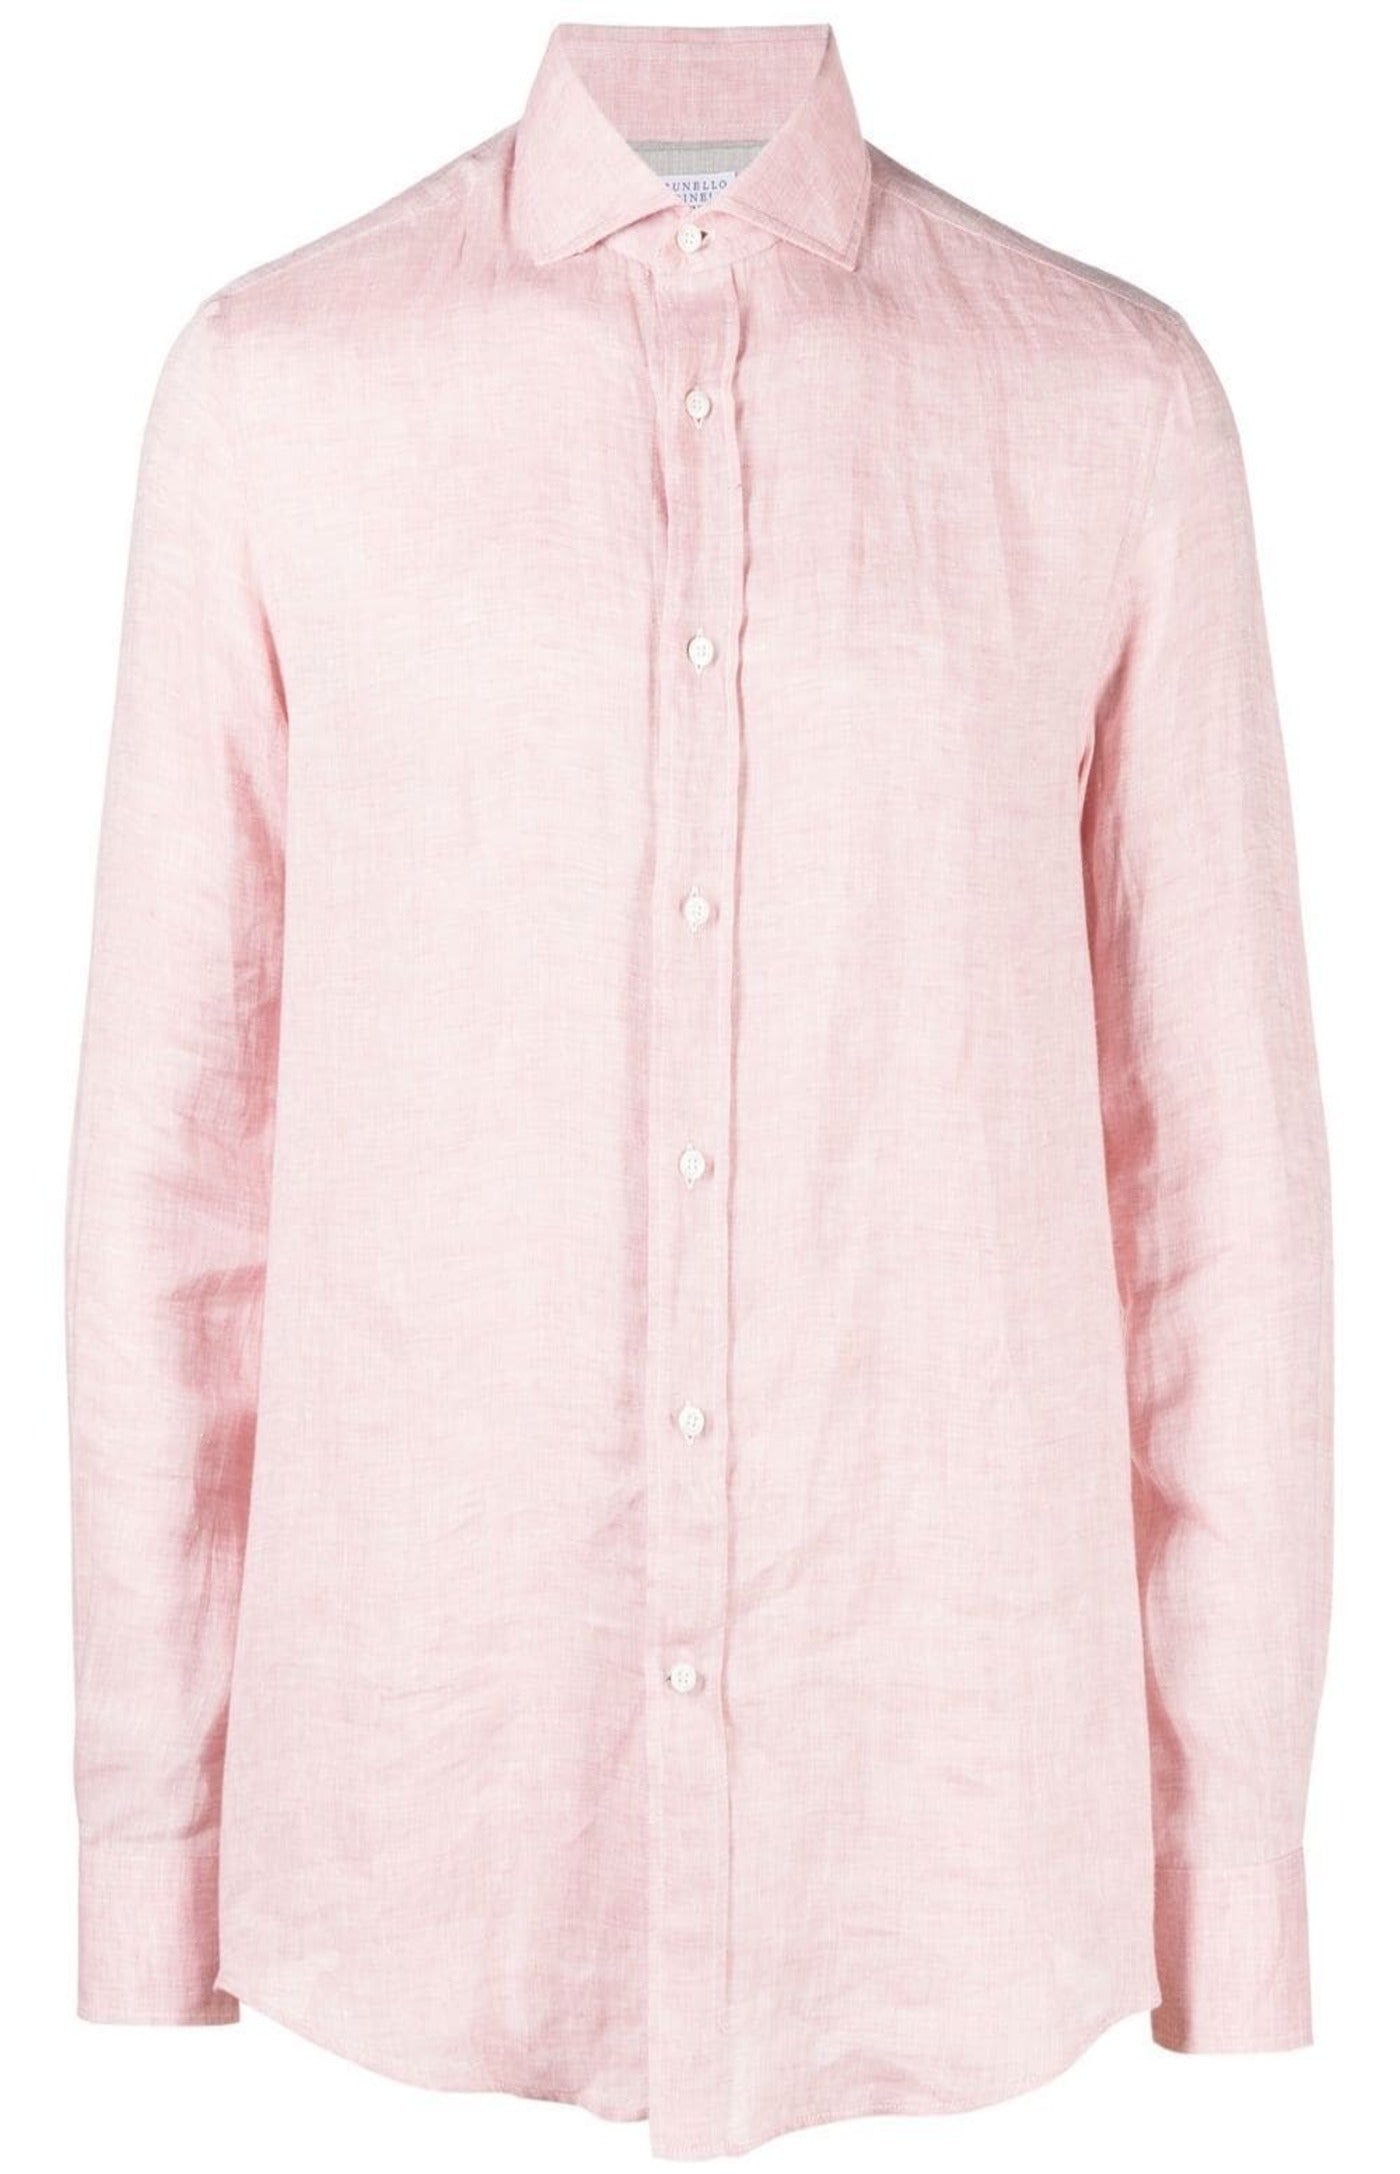 Long-sleeves button-up shirt